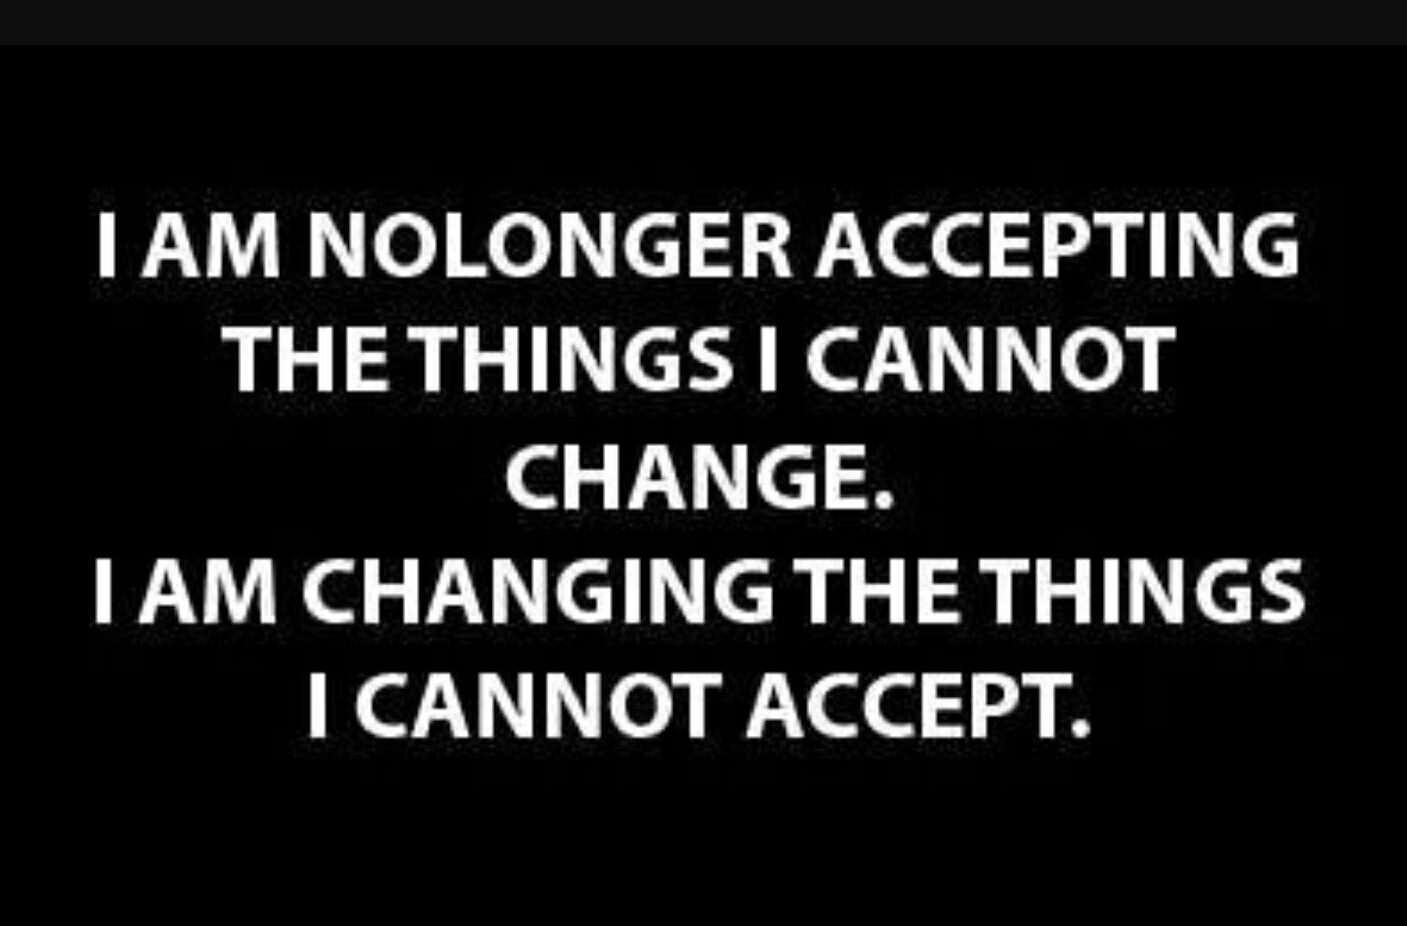 Cannot accept